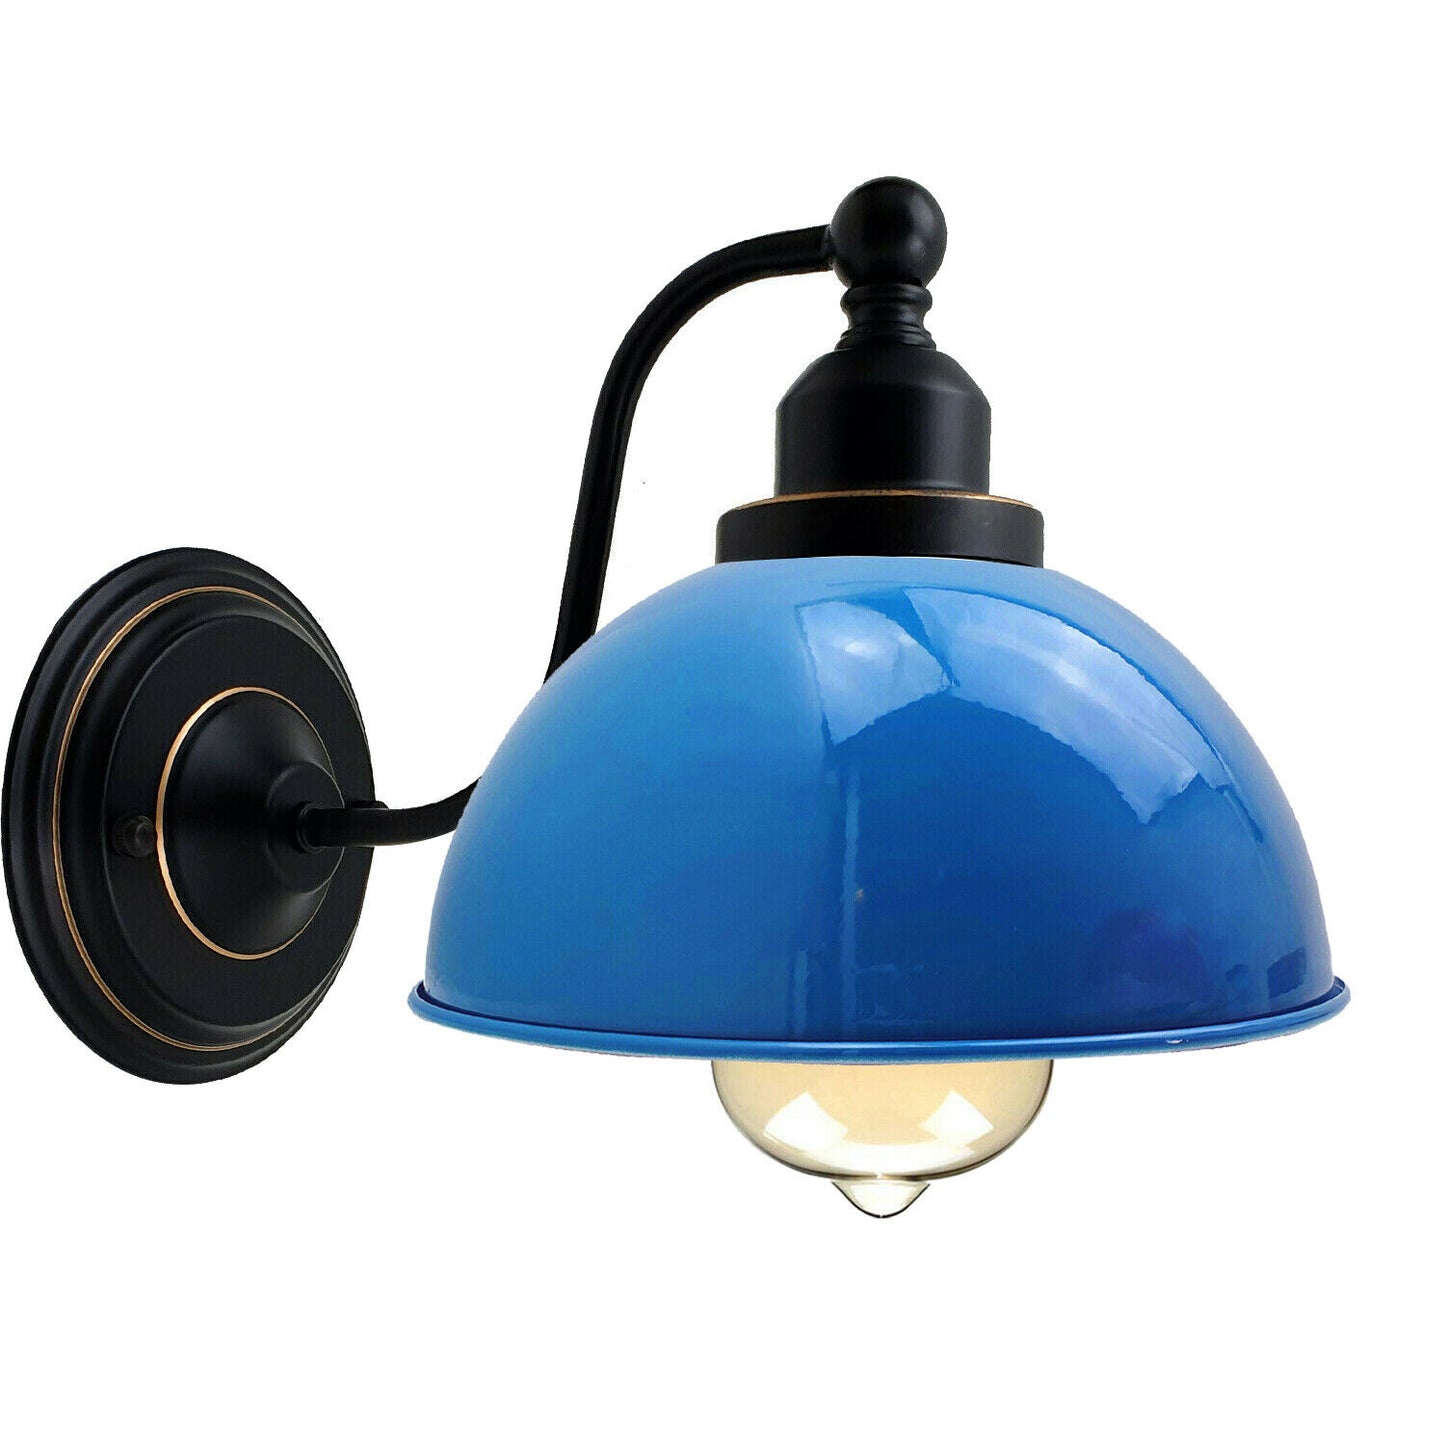 Retro industrial suspended wall lamp